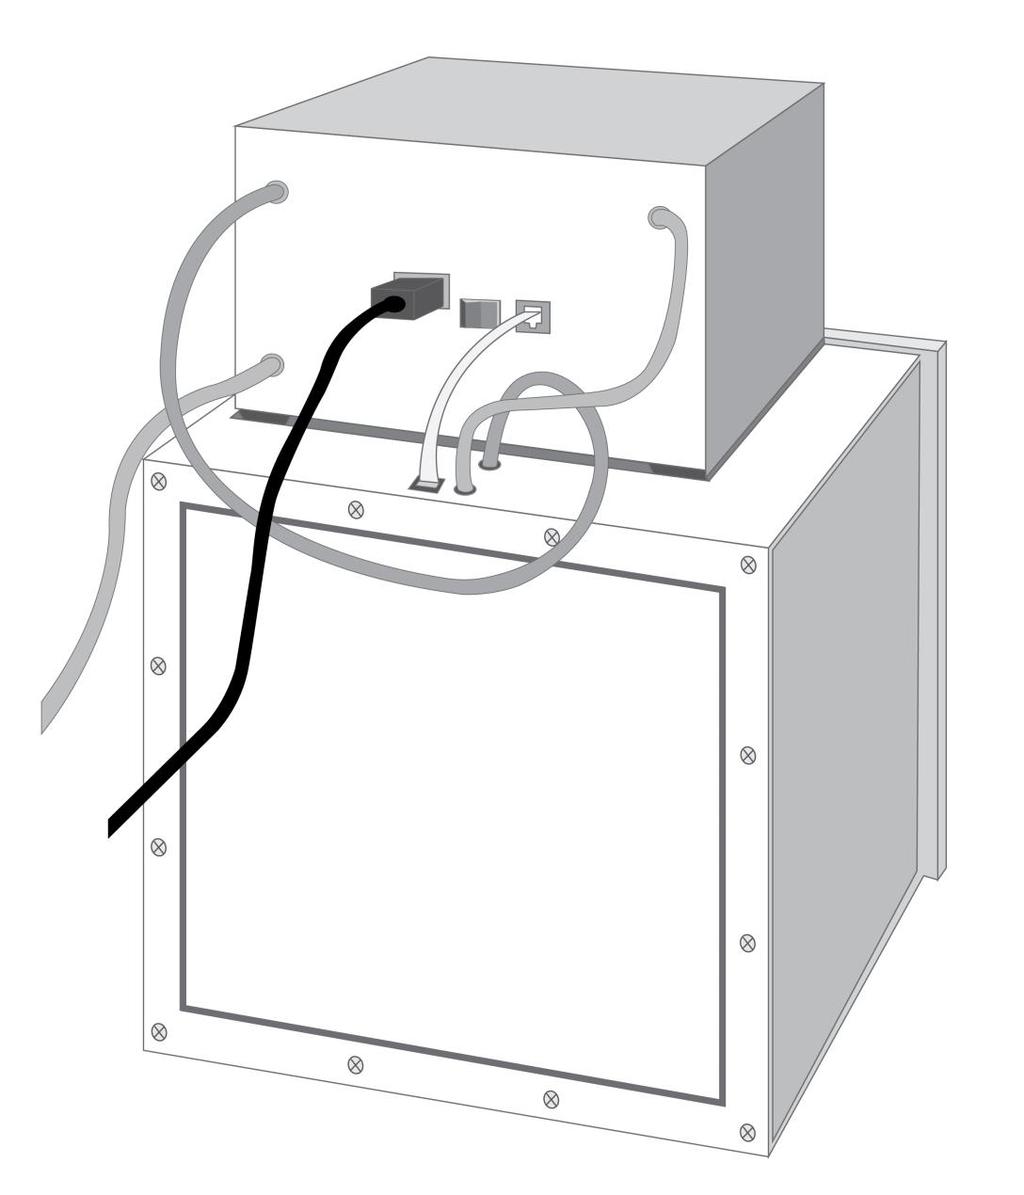 Dual Purge Set-Up (Rear View) 1. Use ¼ tubing to connect the Internal Pressure inlet and Gas Out port to the desiccator as shown. 2.